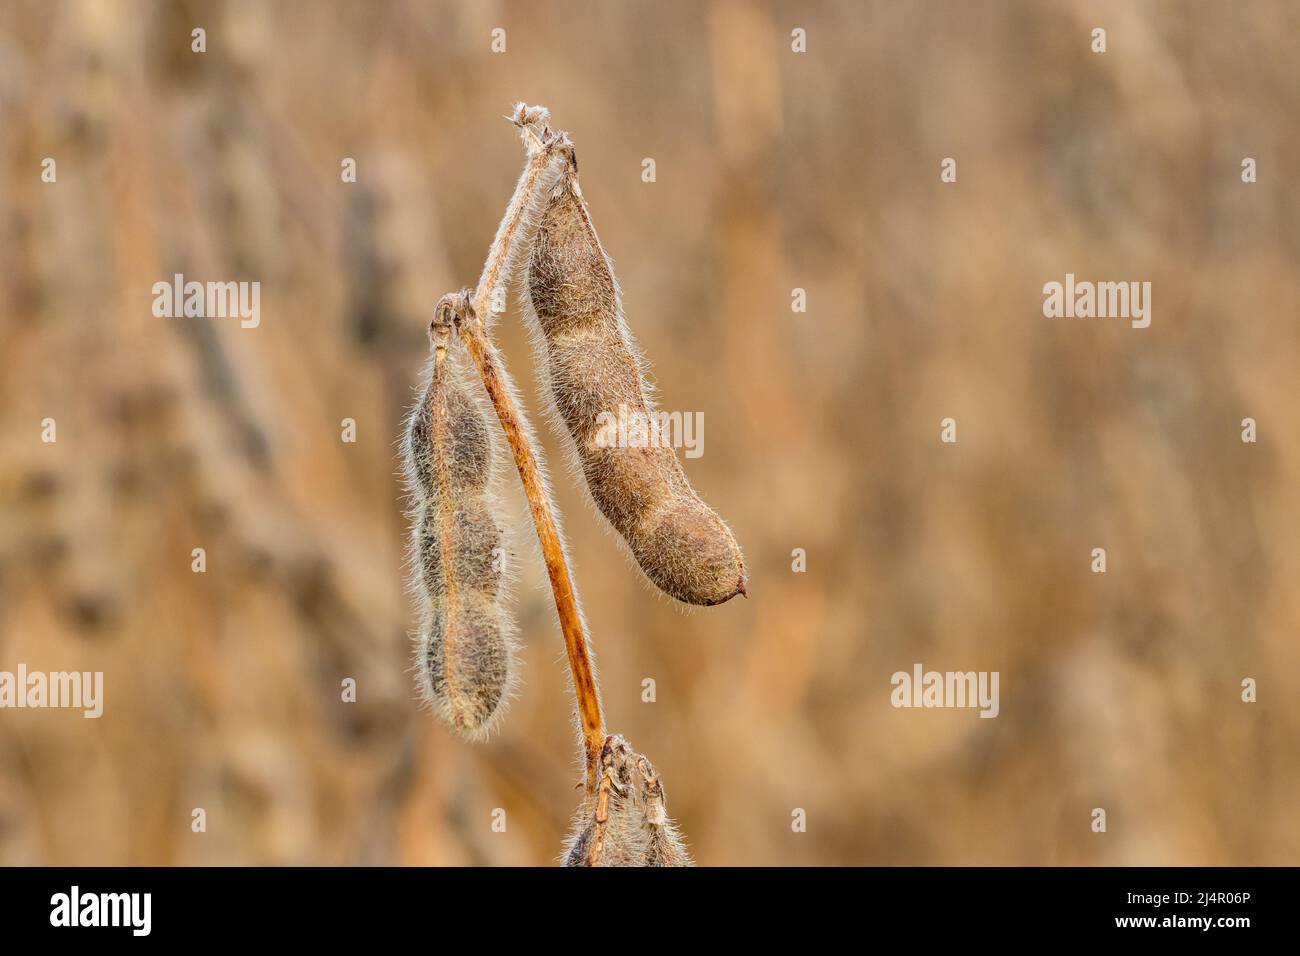 Closeup of four bean soybean pod on plant stem. Farming, agricultural science and fall harvest season concept. Stock Photo